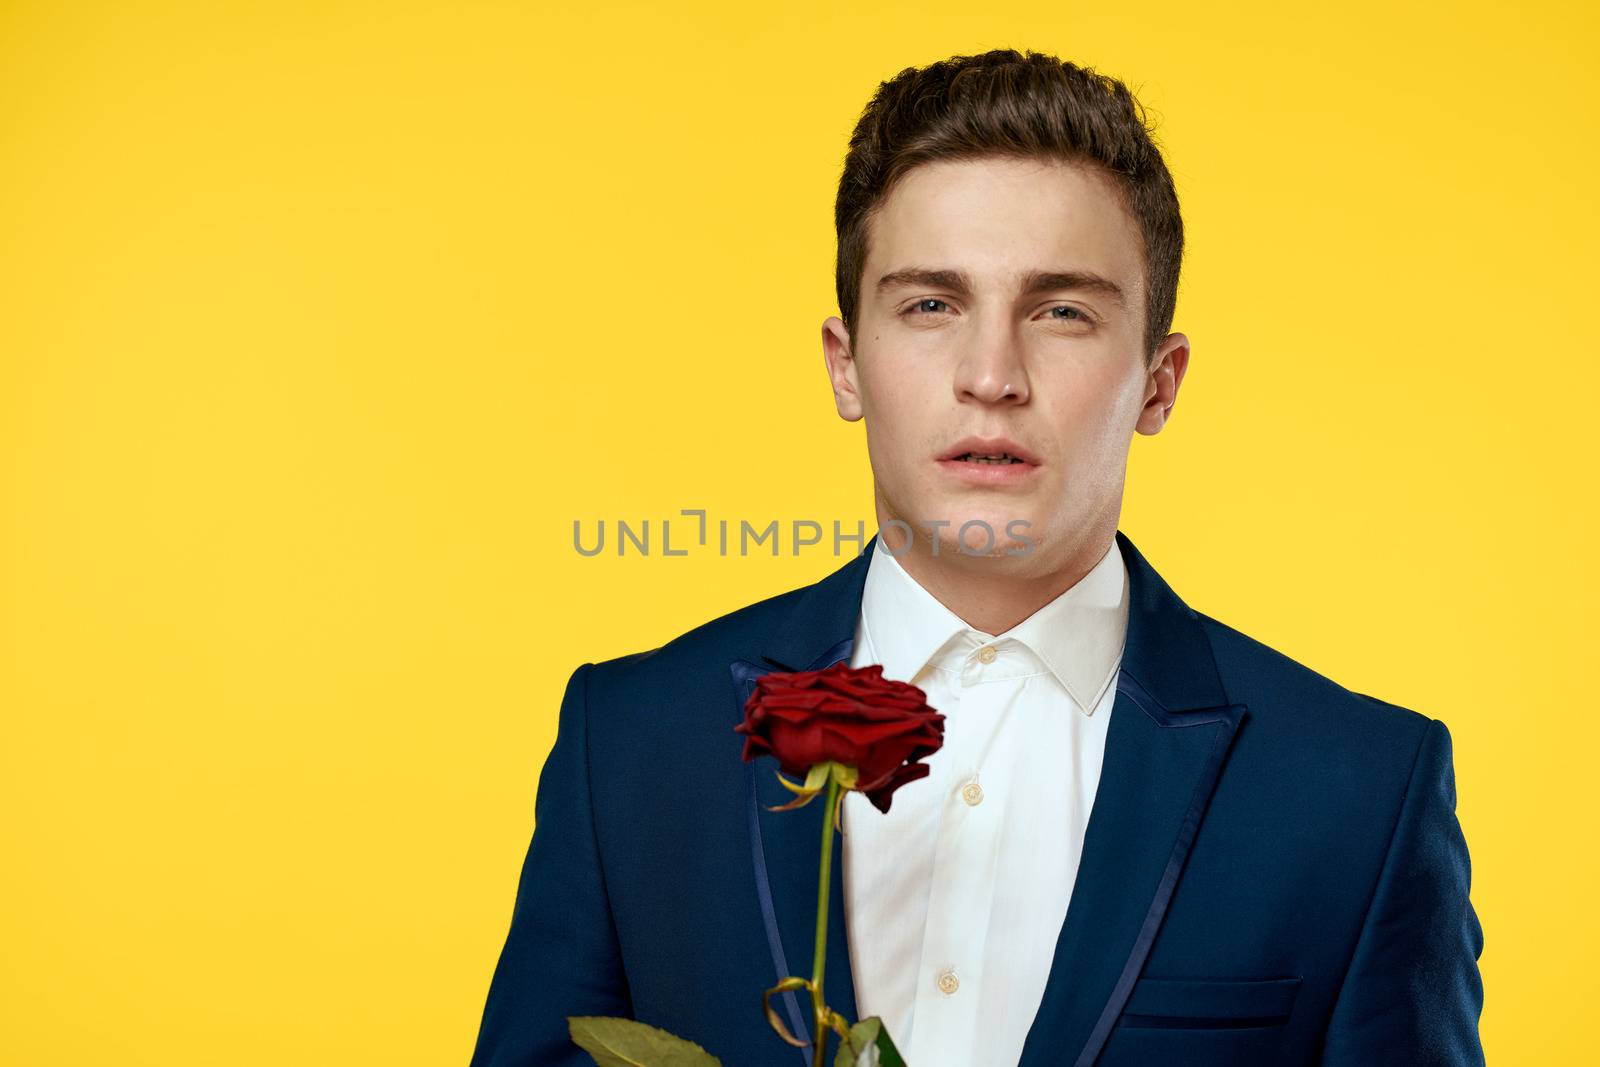 Young man in a classic suit with a red rose in his hand on a yellow background emotions cropped view model. High quality photo